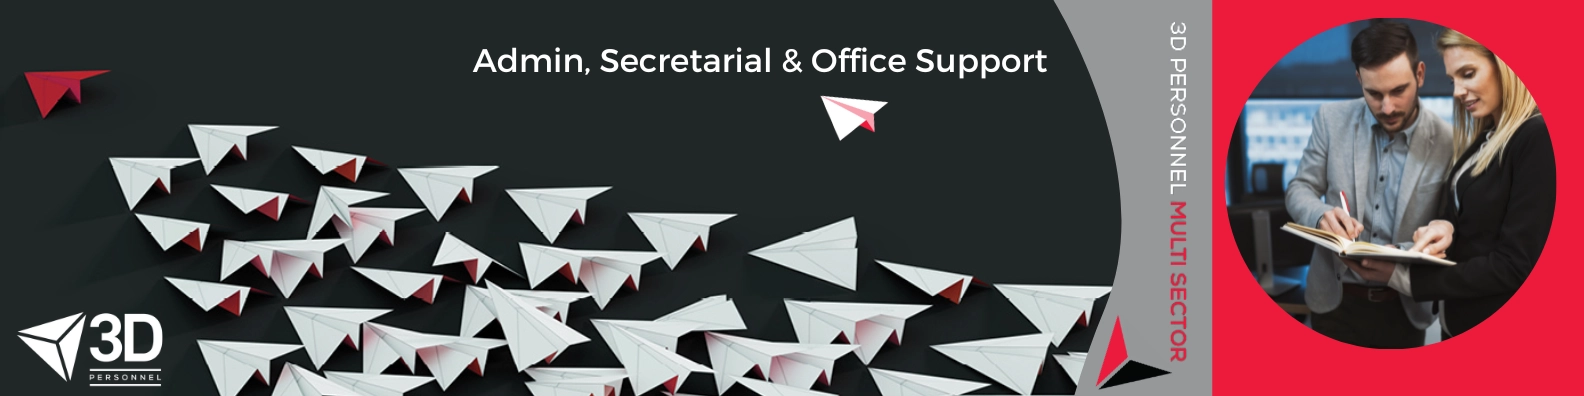 Administrative, Secretarial & Office Support graphic